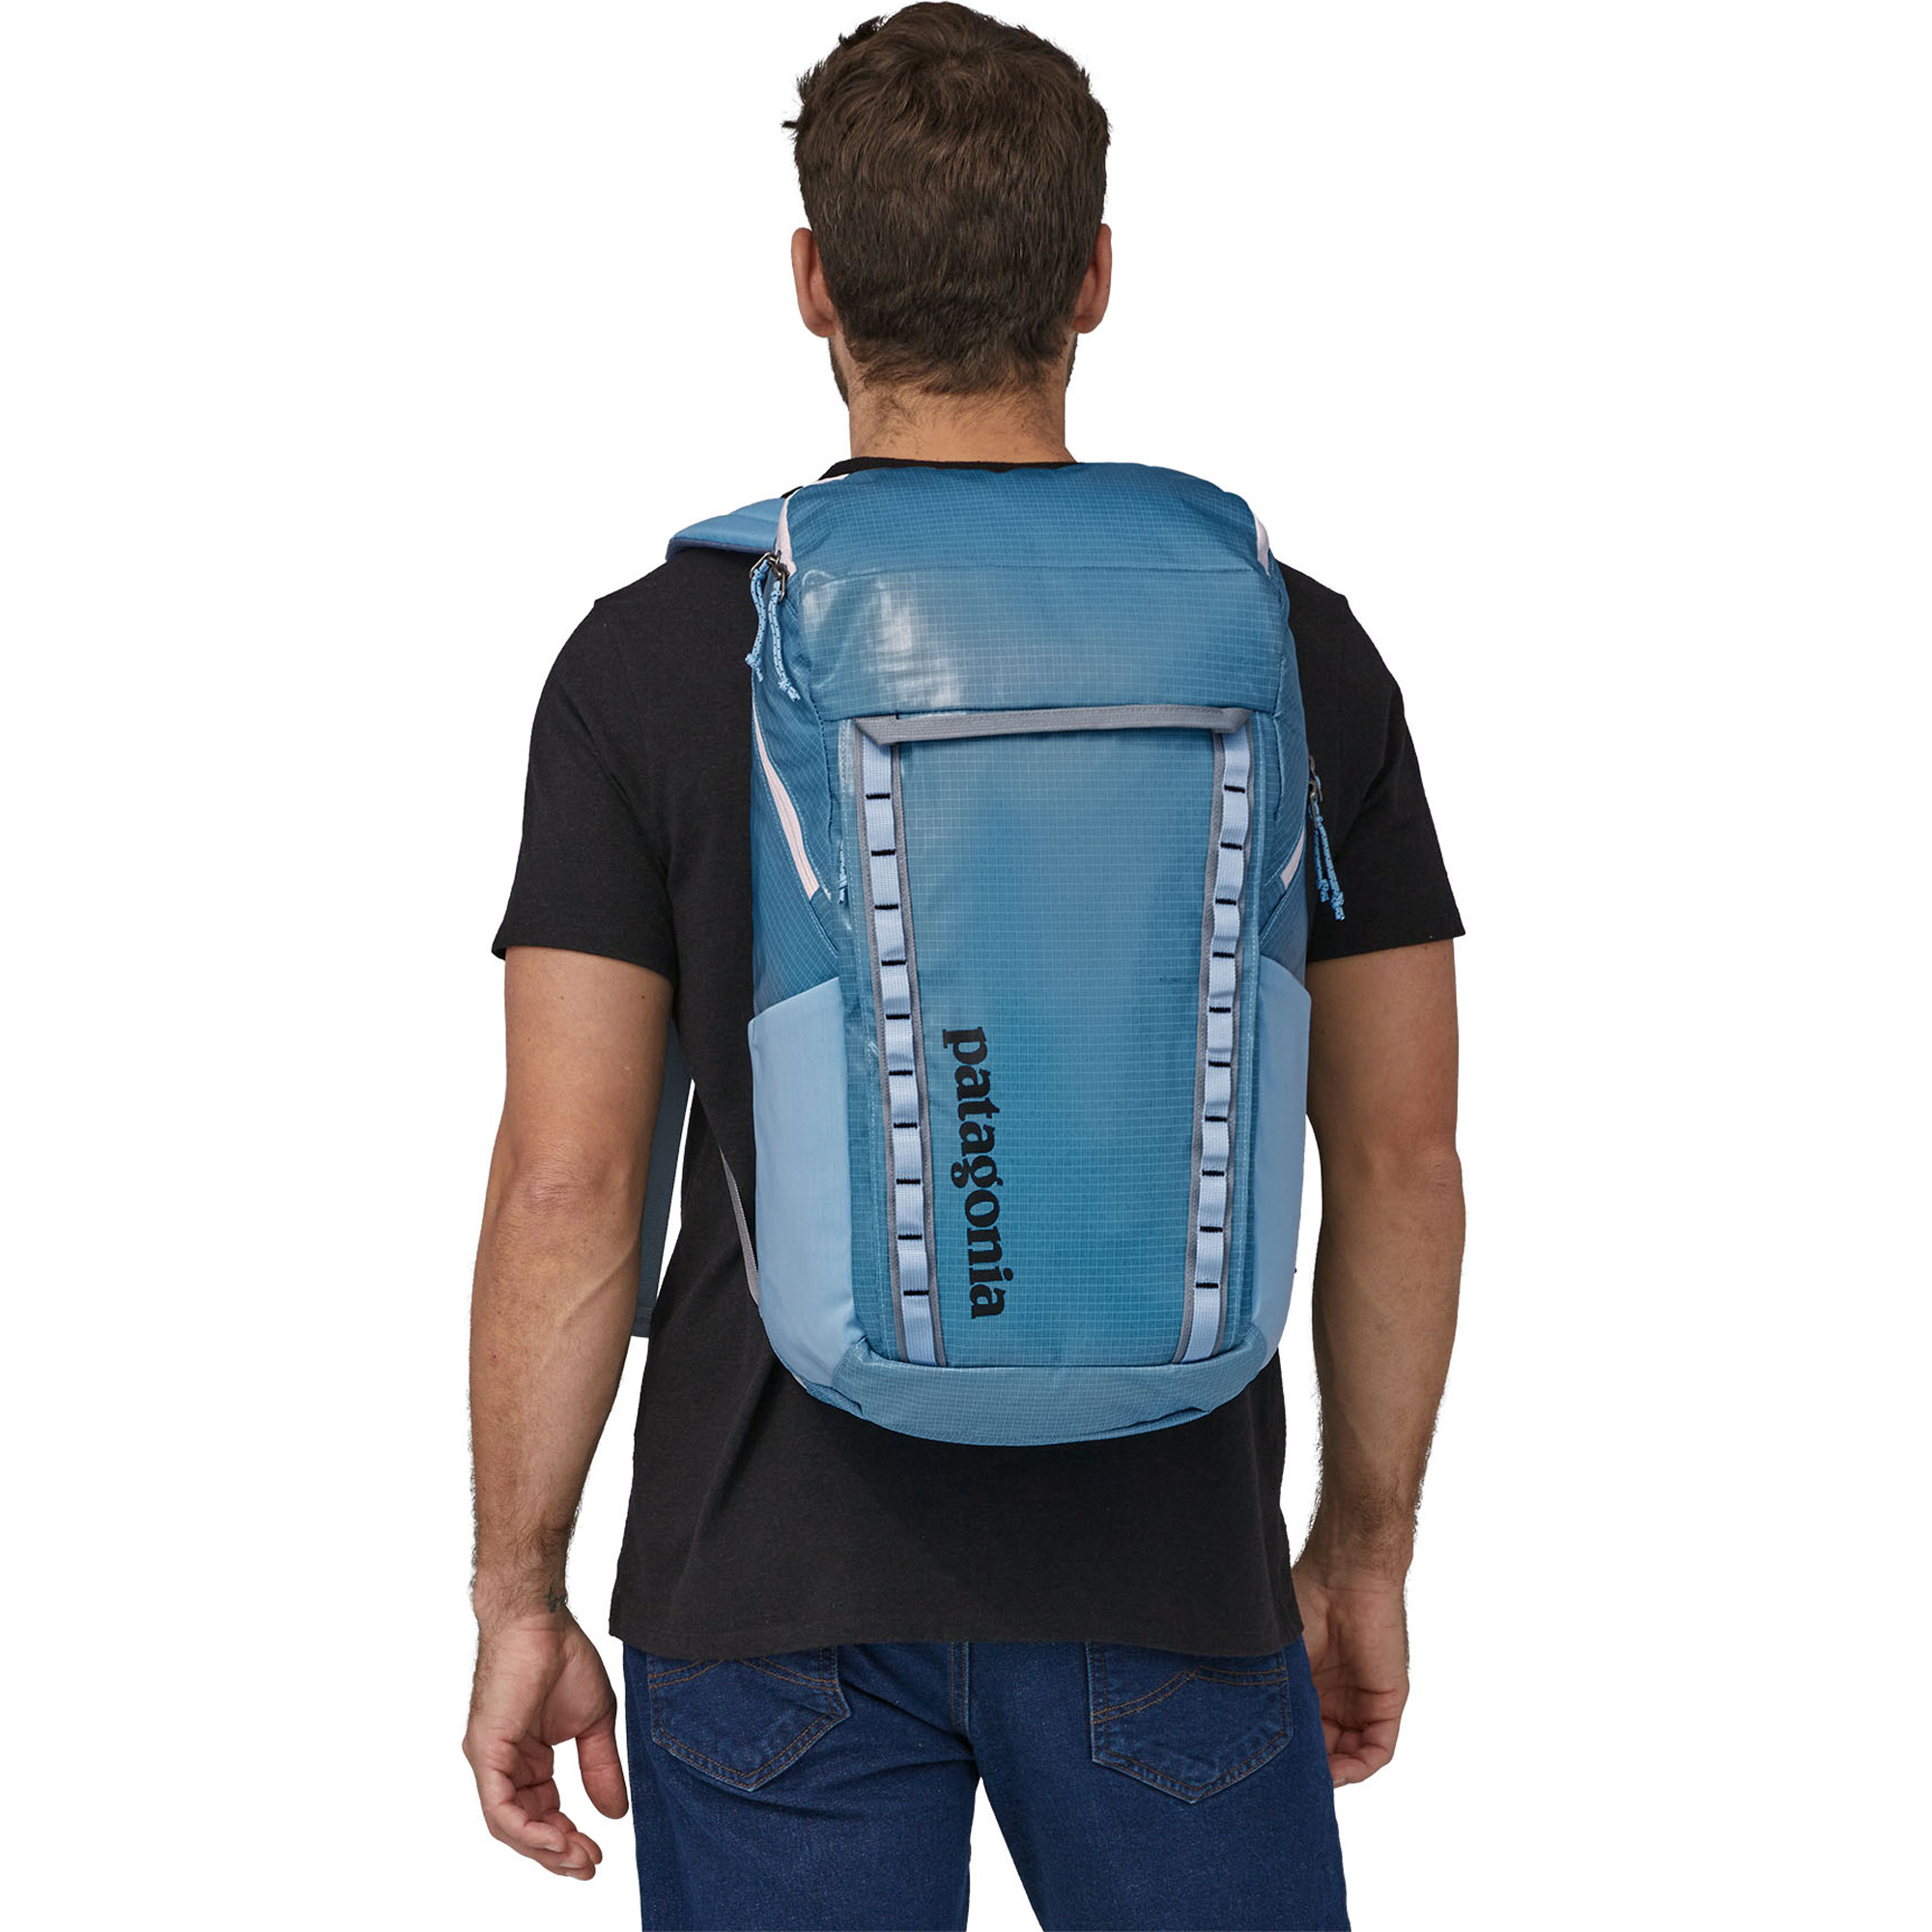 Patagonia Black Hole 32 Day Pack/Backpack